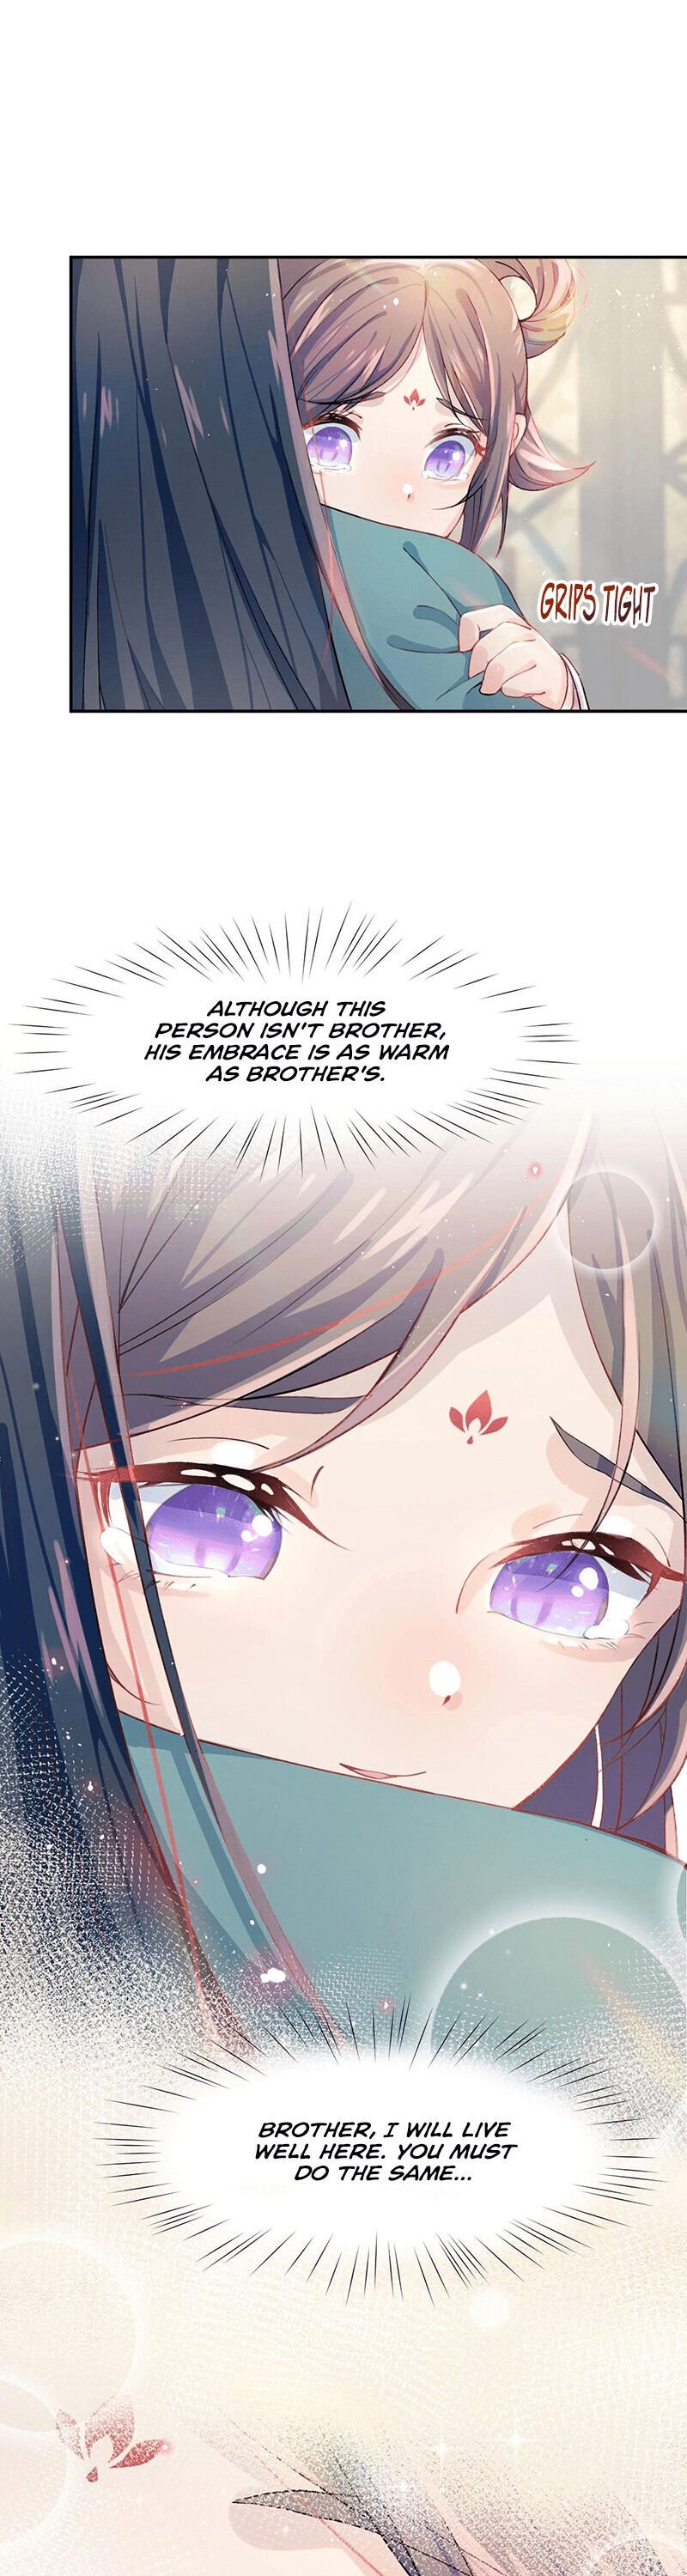 Brother’s Sick Love chapter 2